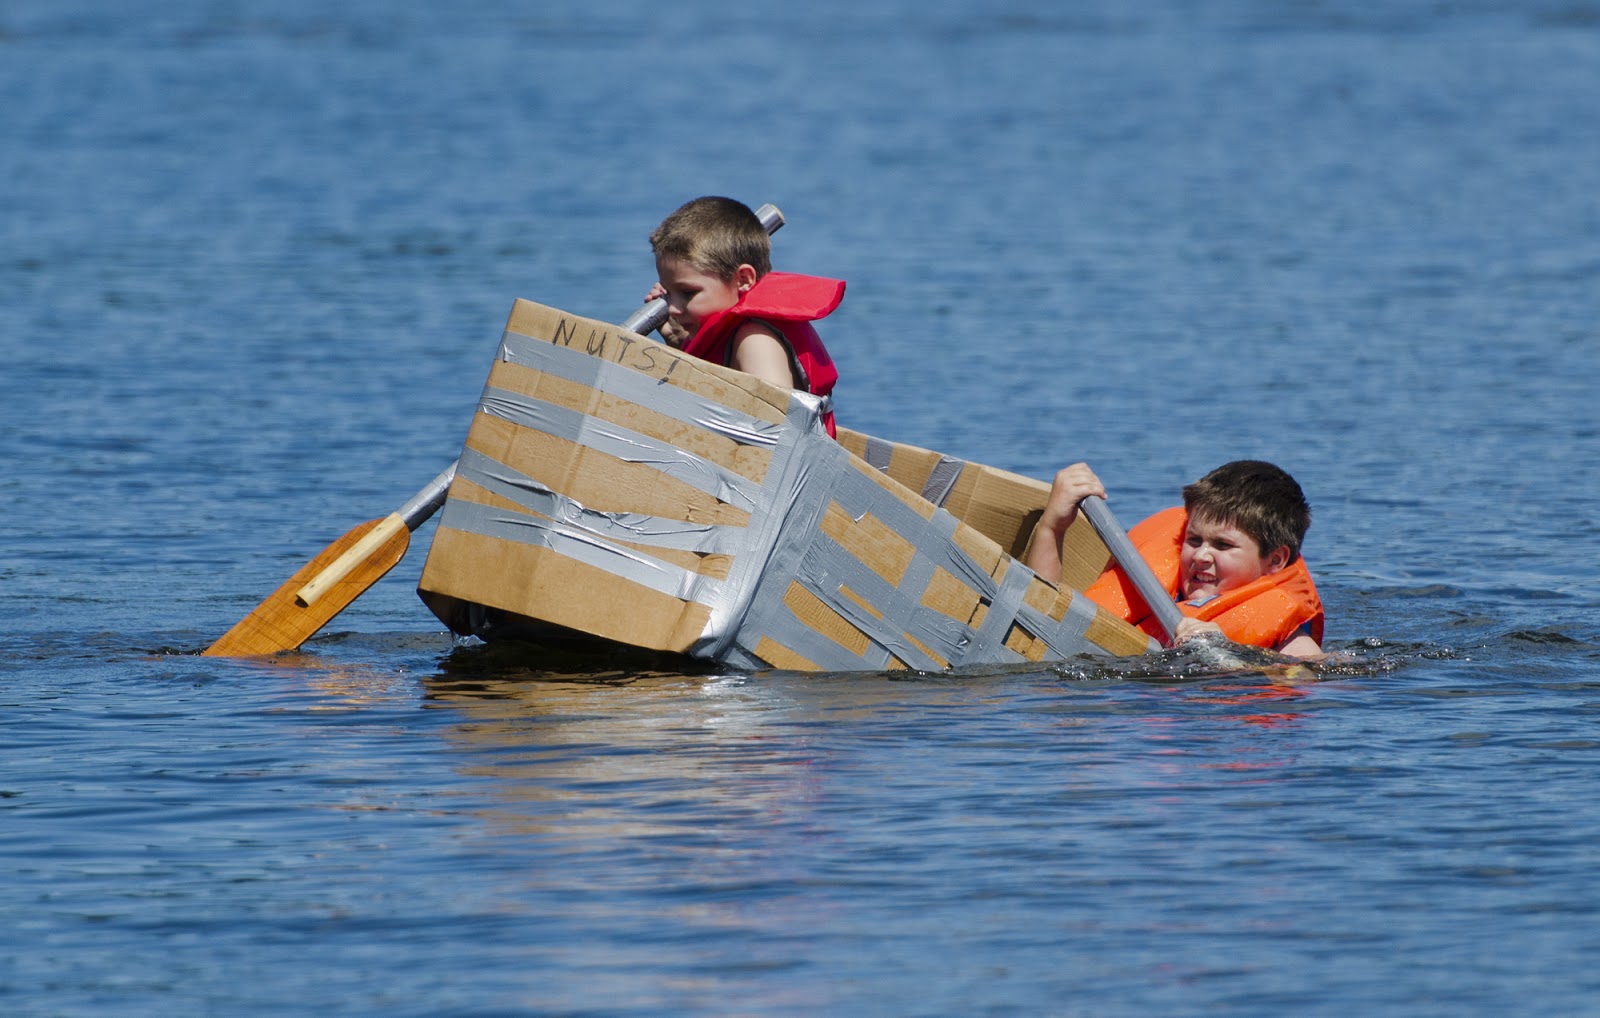 Julia McKay - Photojournalist: My first duct tape boat race